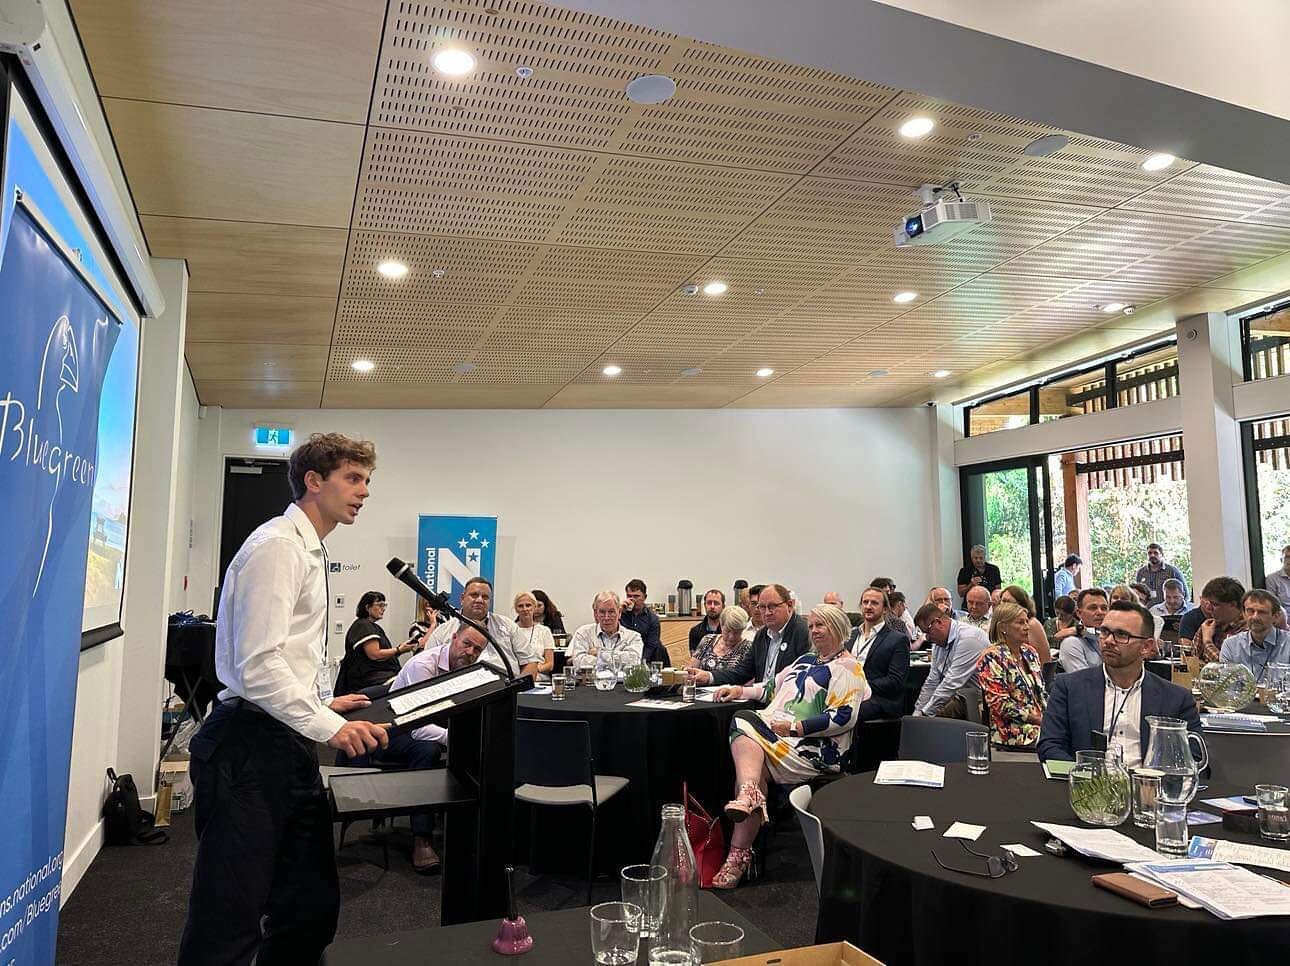 It was a priveleage for co-chair @finnrossnz to speak about the Future Farmers vison and Manifesto at the annual Blue Greens forum @nznationalparty. The forum is a fantastic mixing pot of ideas with @federatedfarmers, @forestandbird and everyone in b